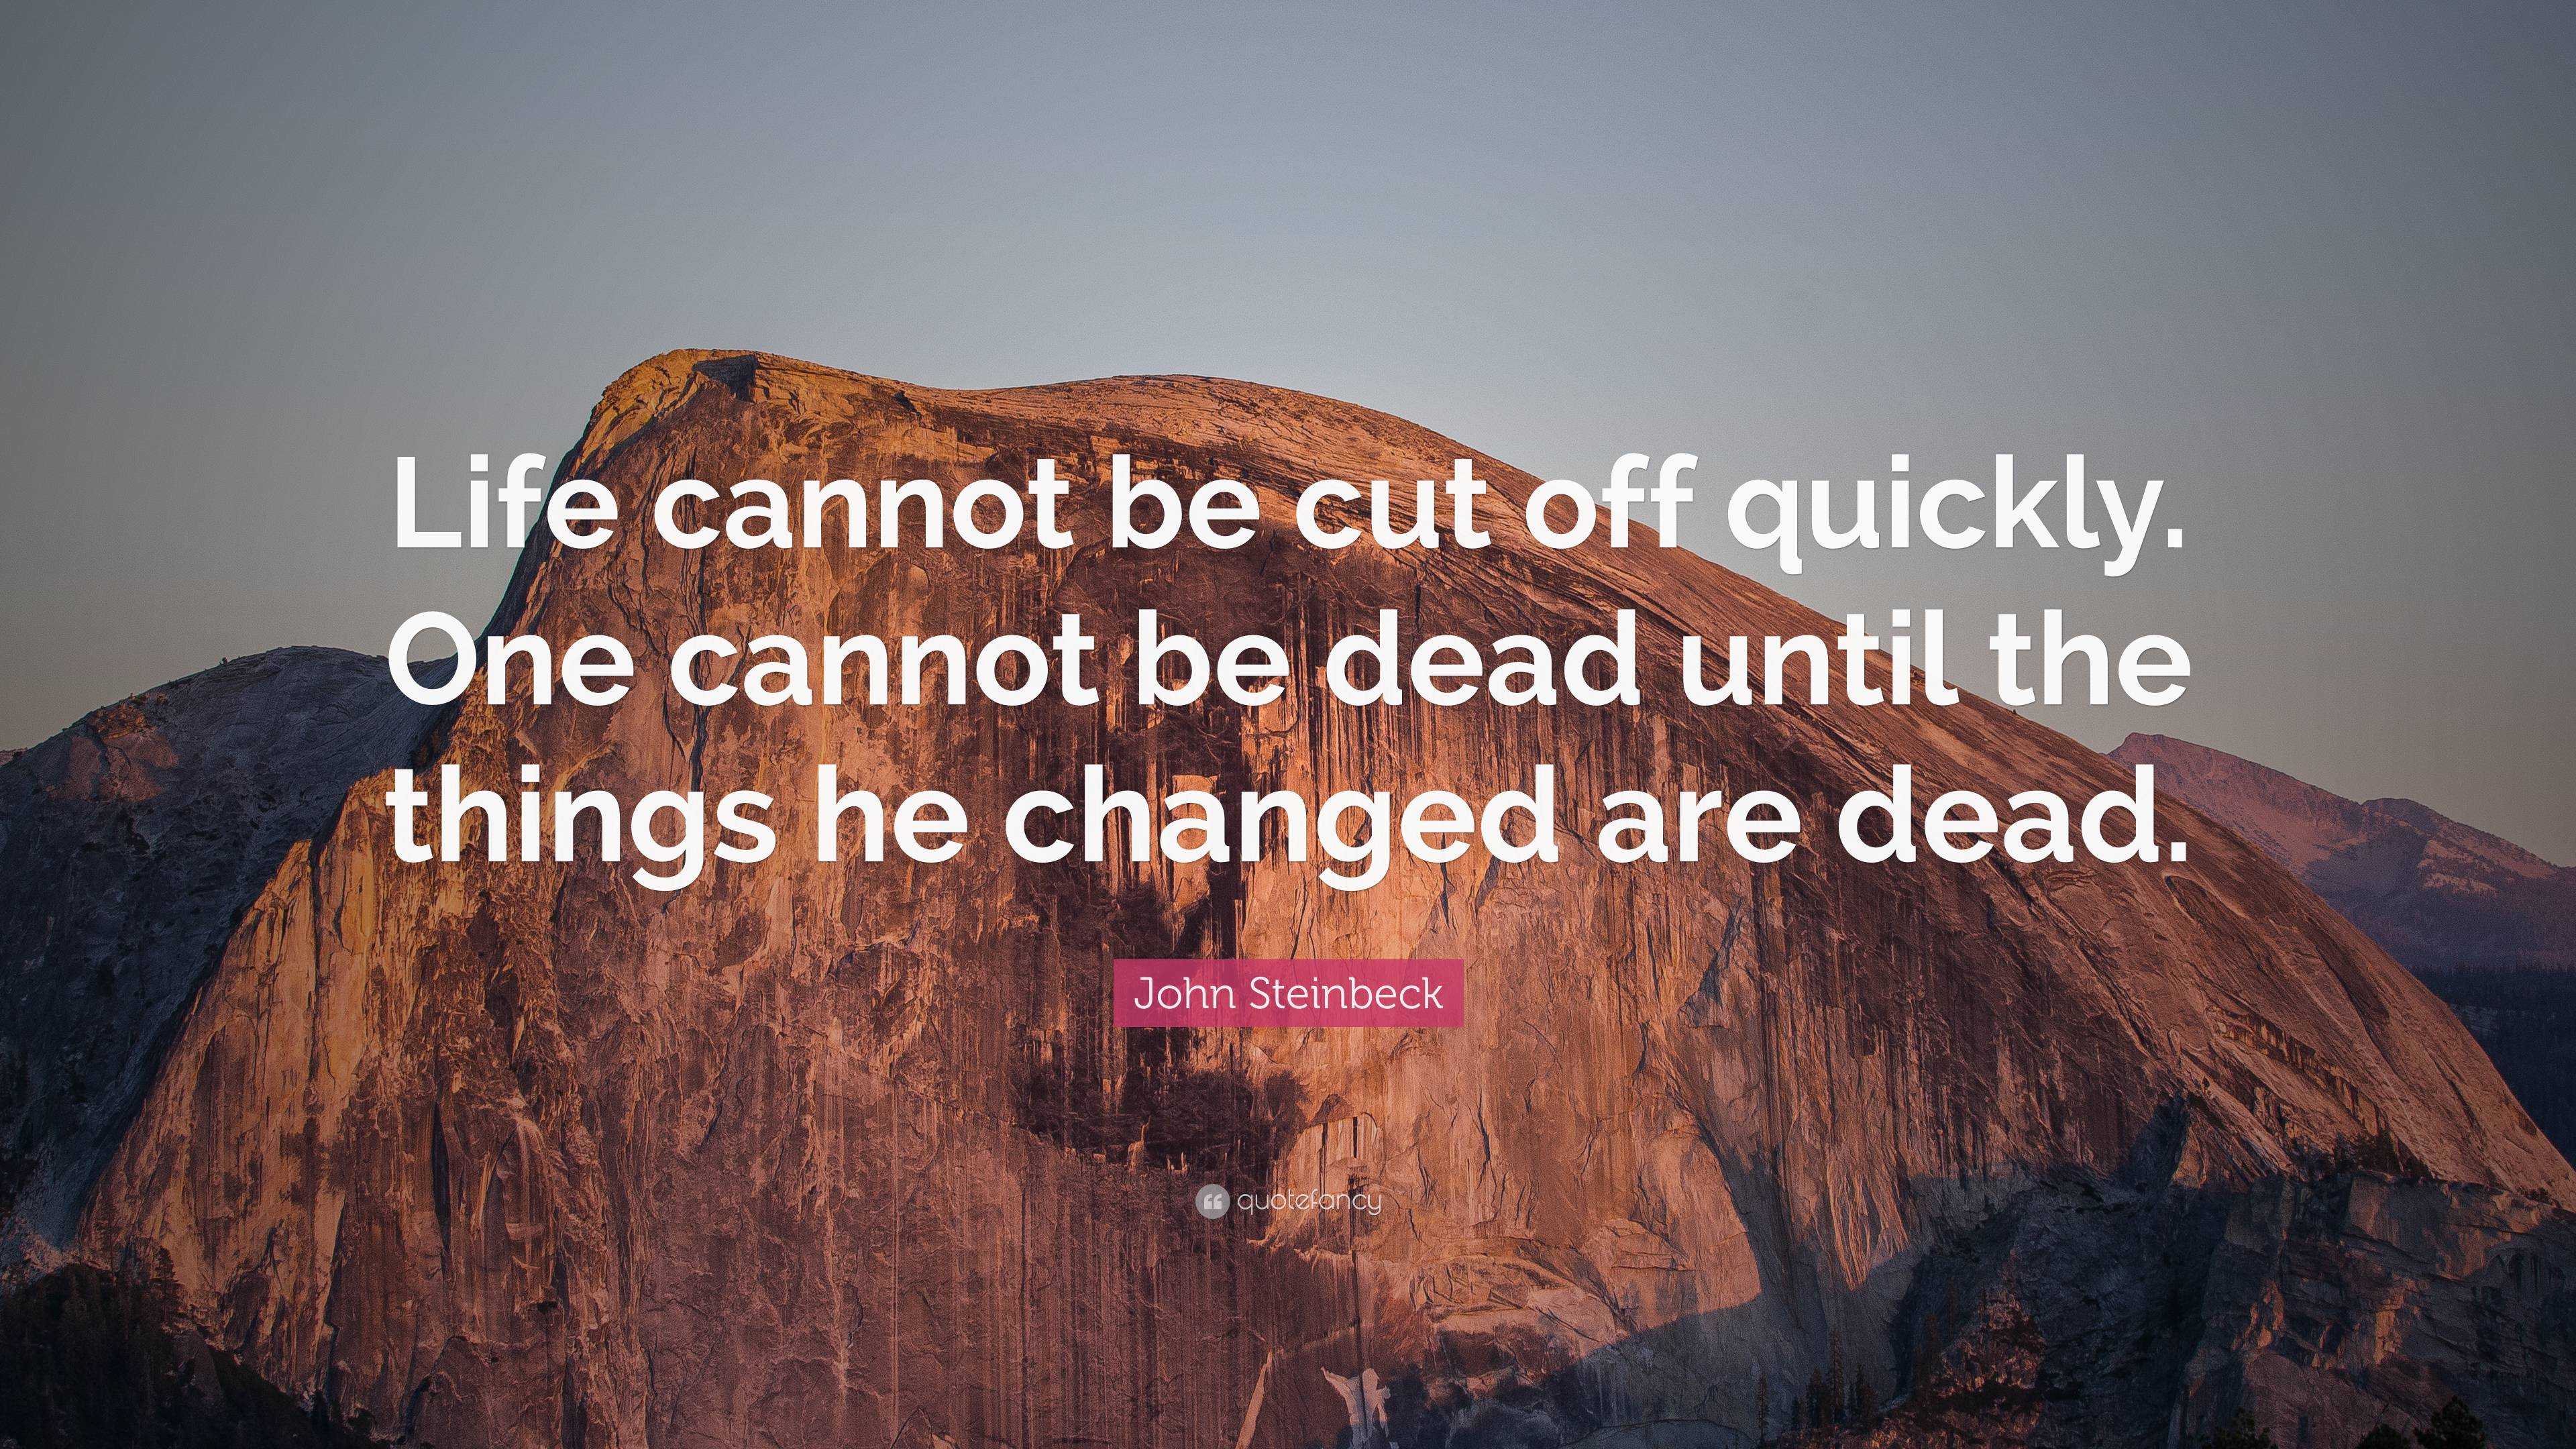 John Steinbeck Quote: “Life cannot be cut off quickly. One cannot be ...